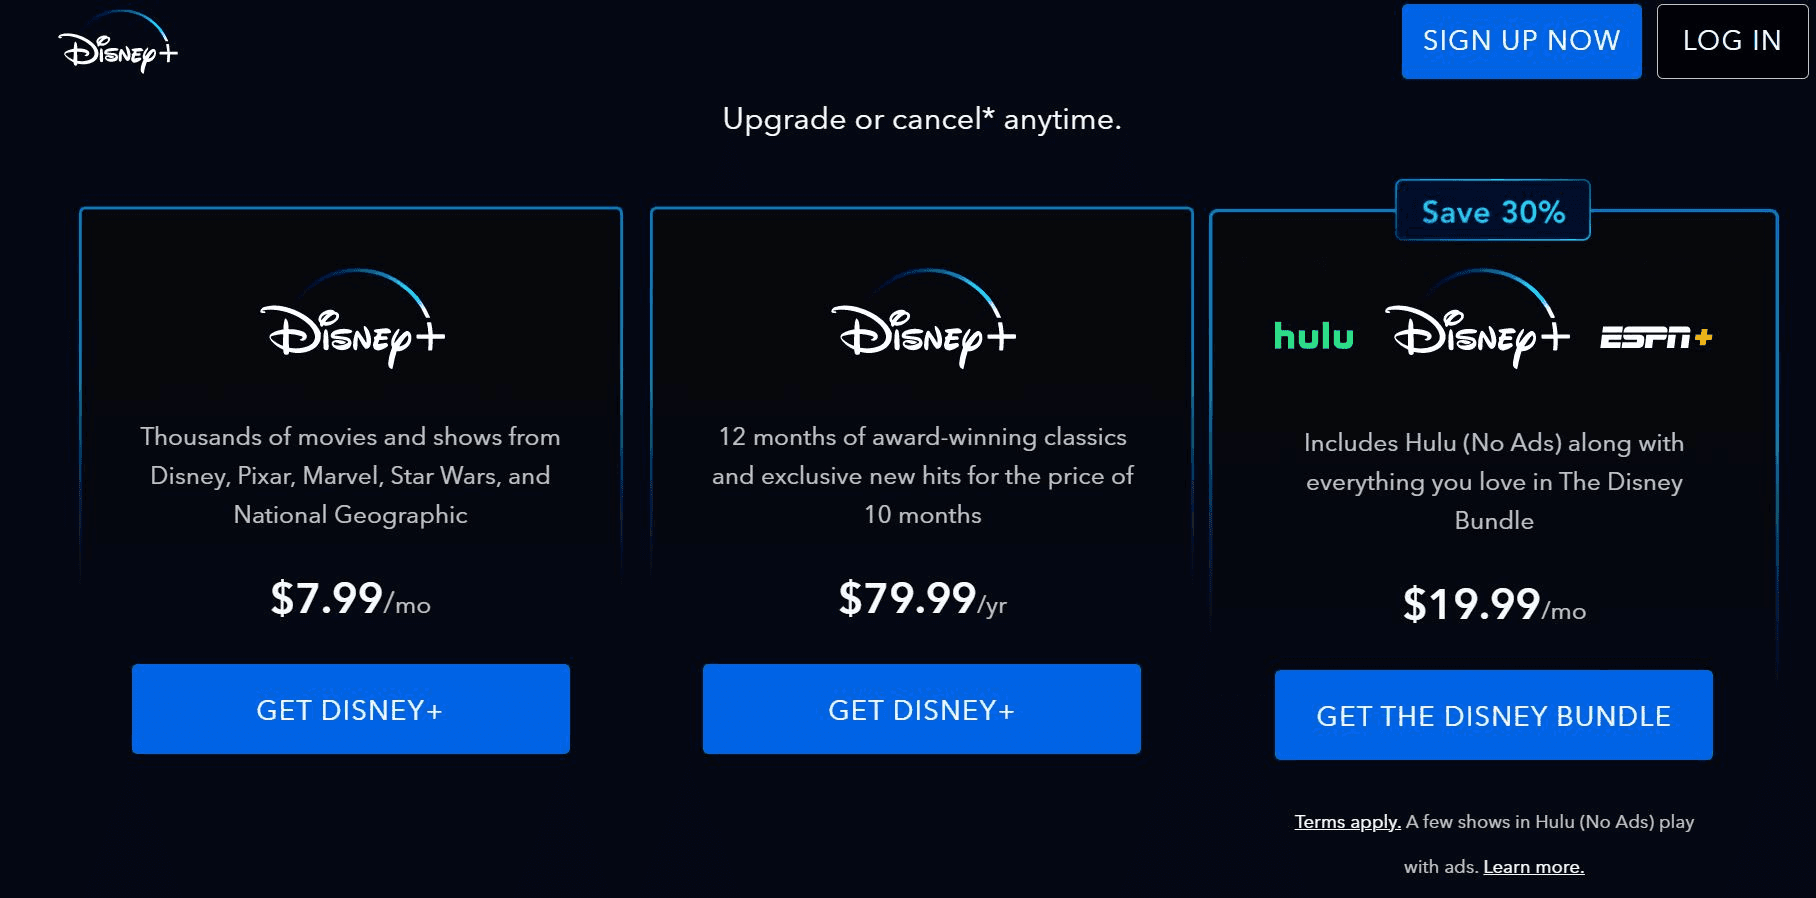 Disney+ plans and prices